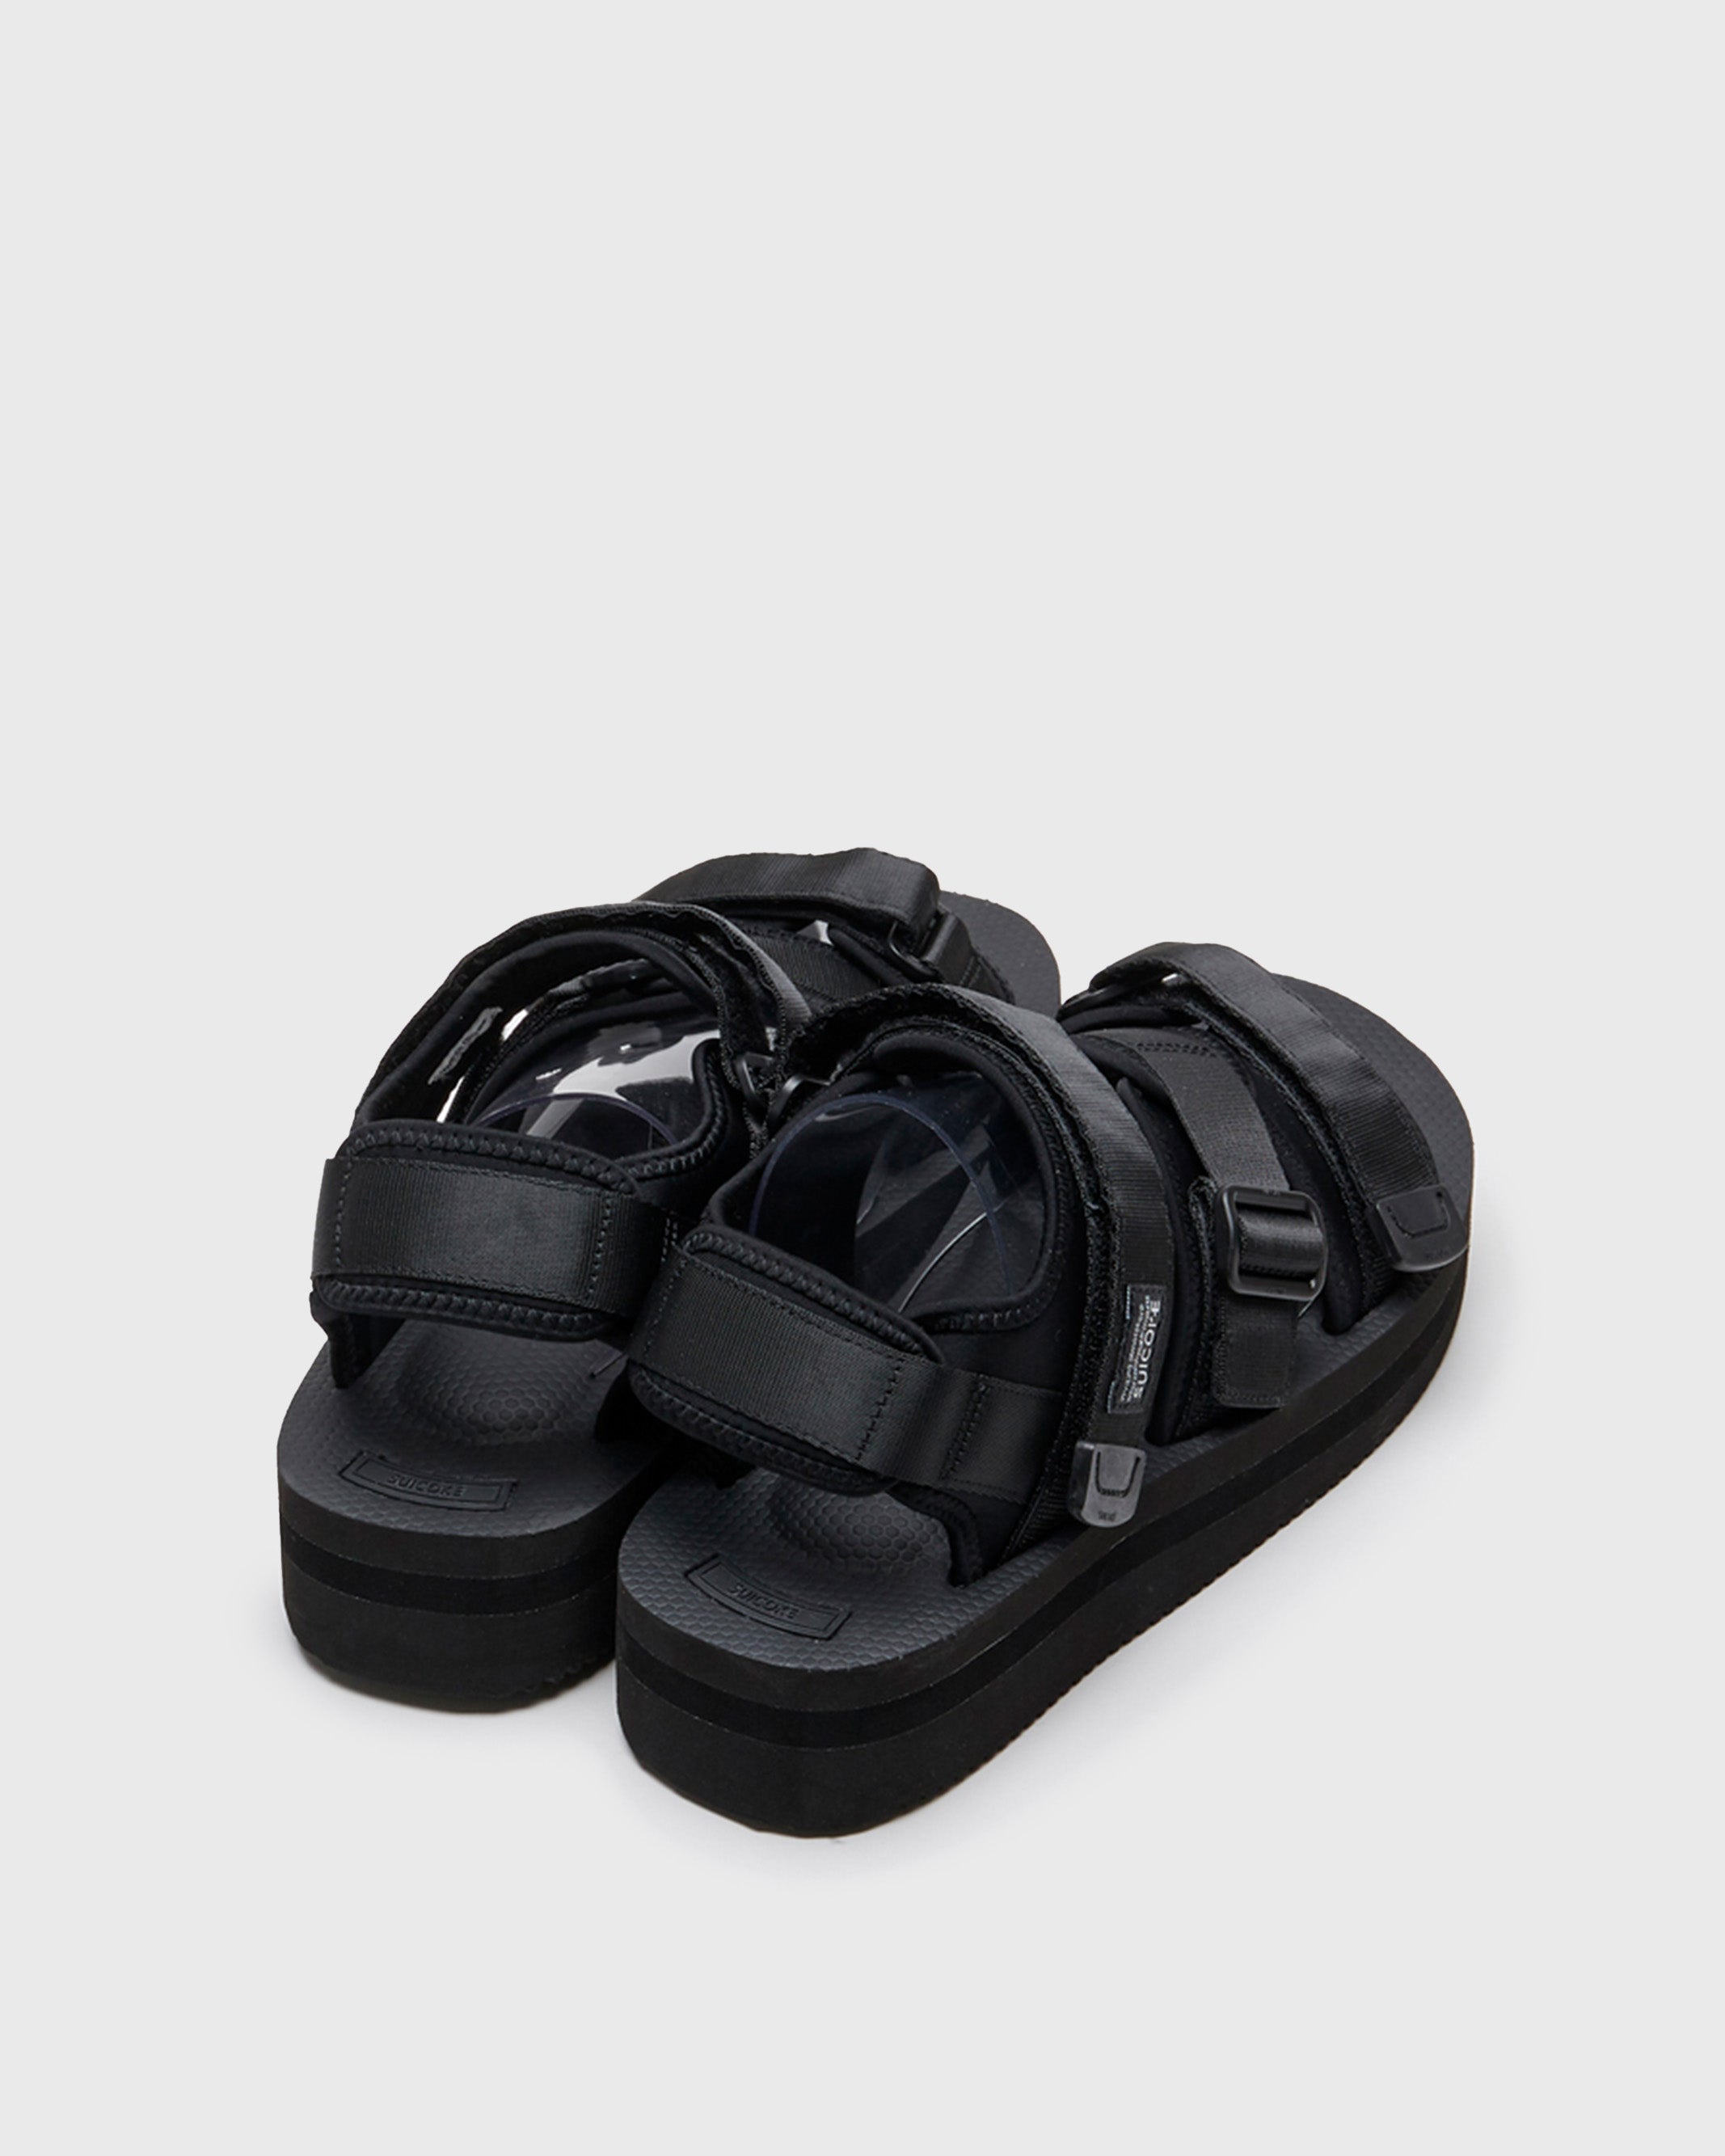 SUICOKE KISEE-VPO in Black OG-044VPO | Shop from eightywingold an official brand partner for SUICOKE Canada and US.